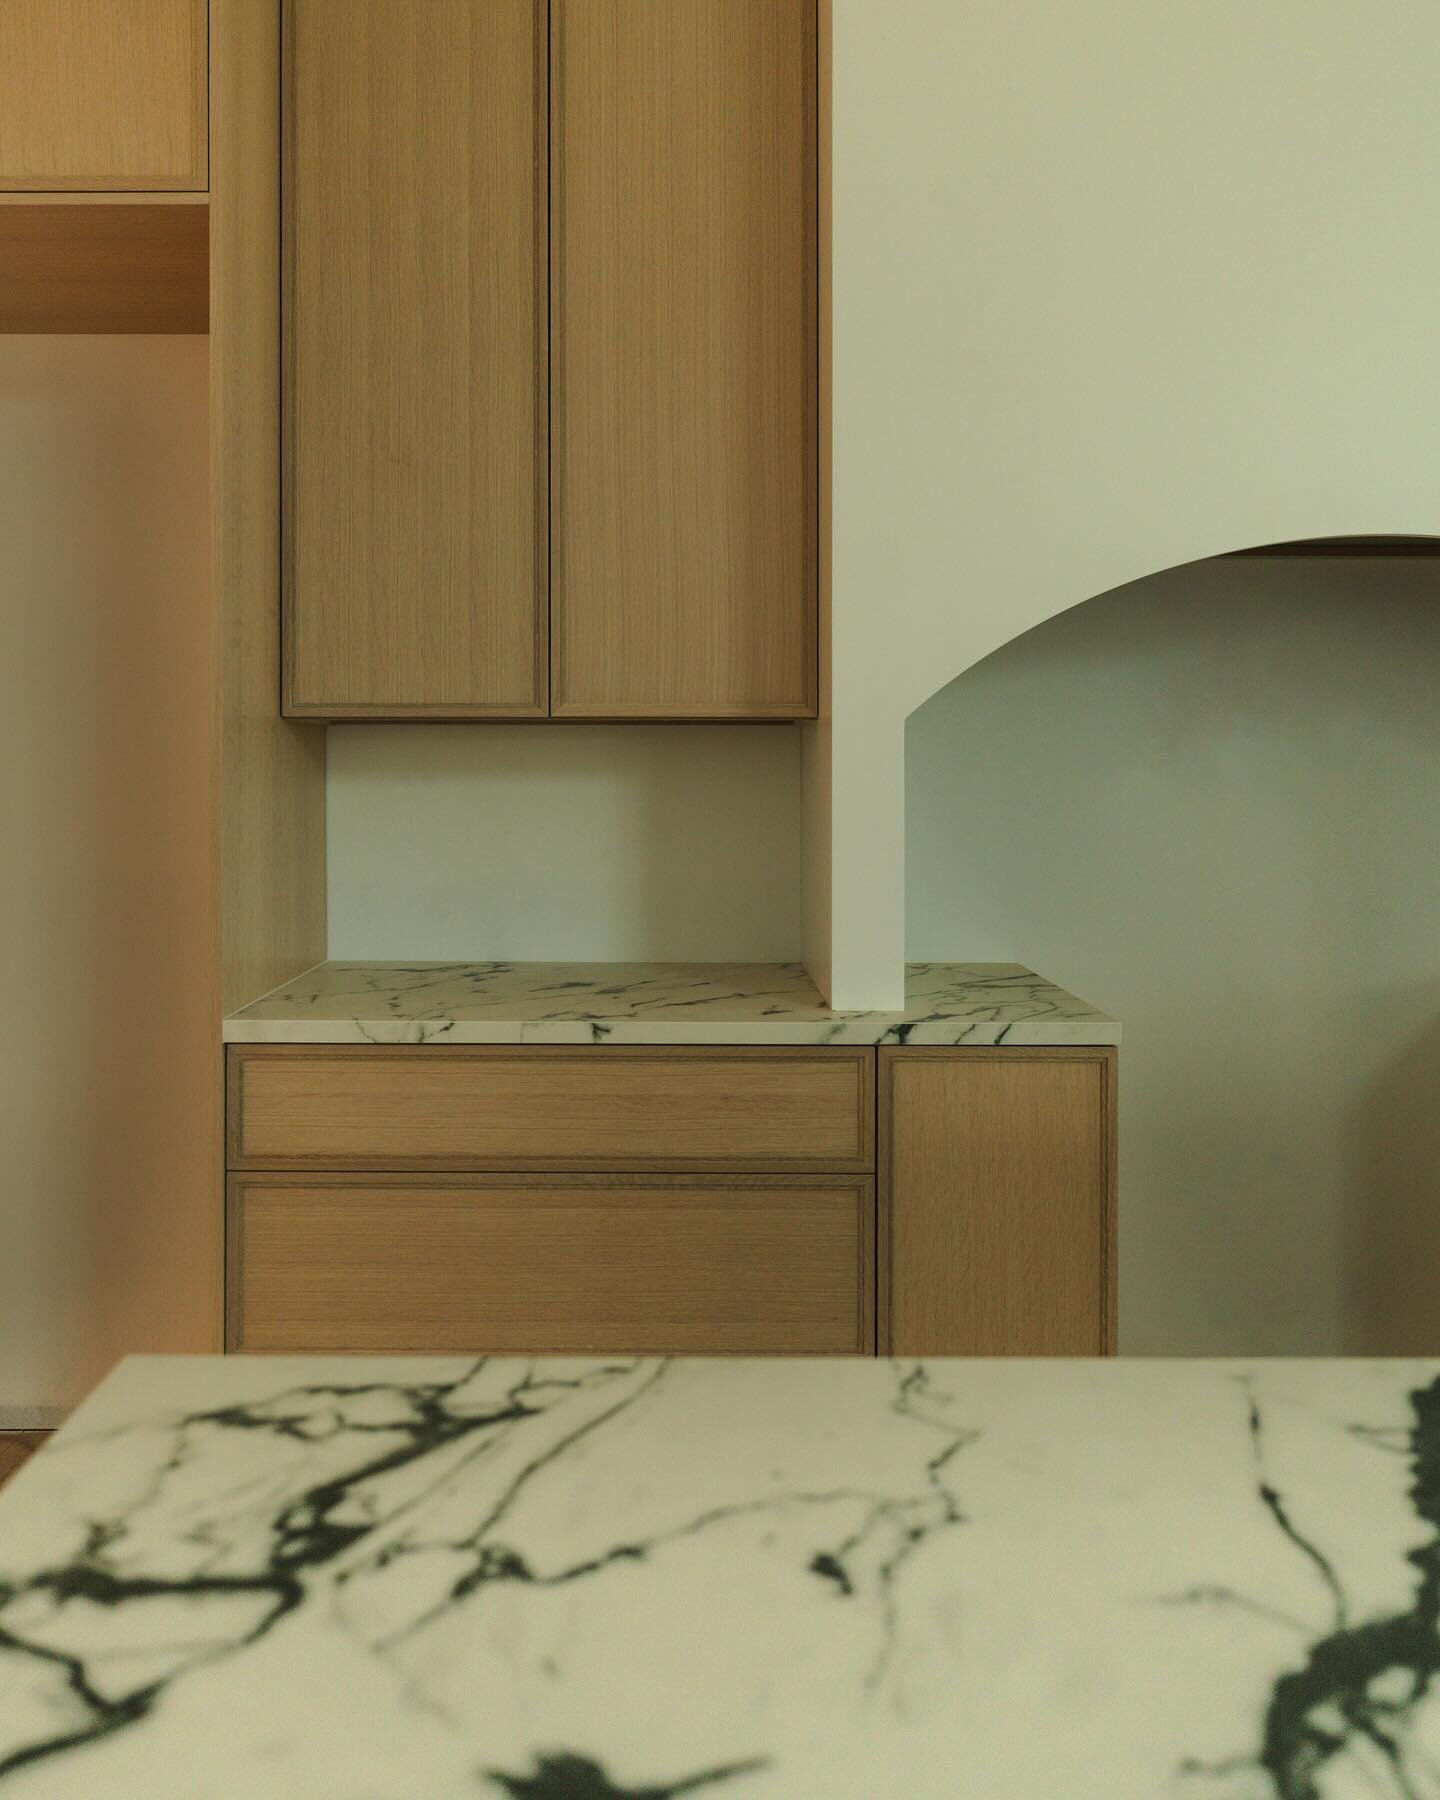 Loving these kitchen design details from the talented @shalmaikeim on our Geneva home build.